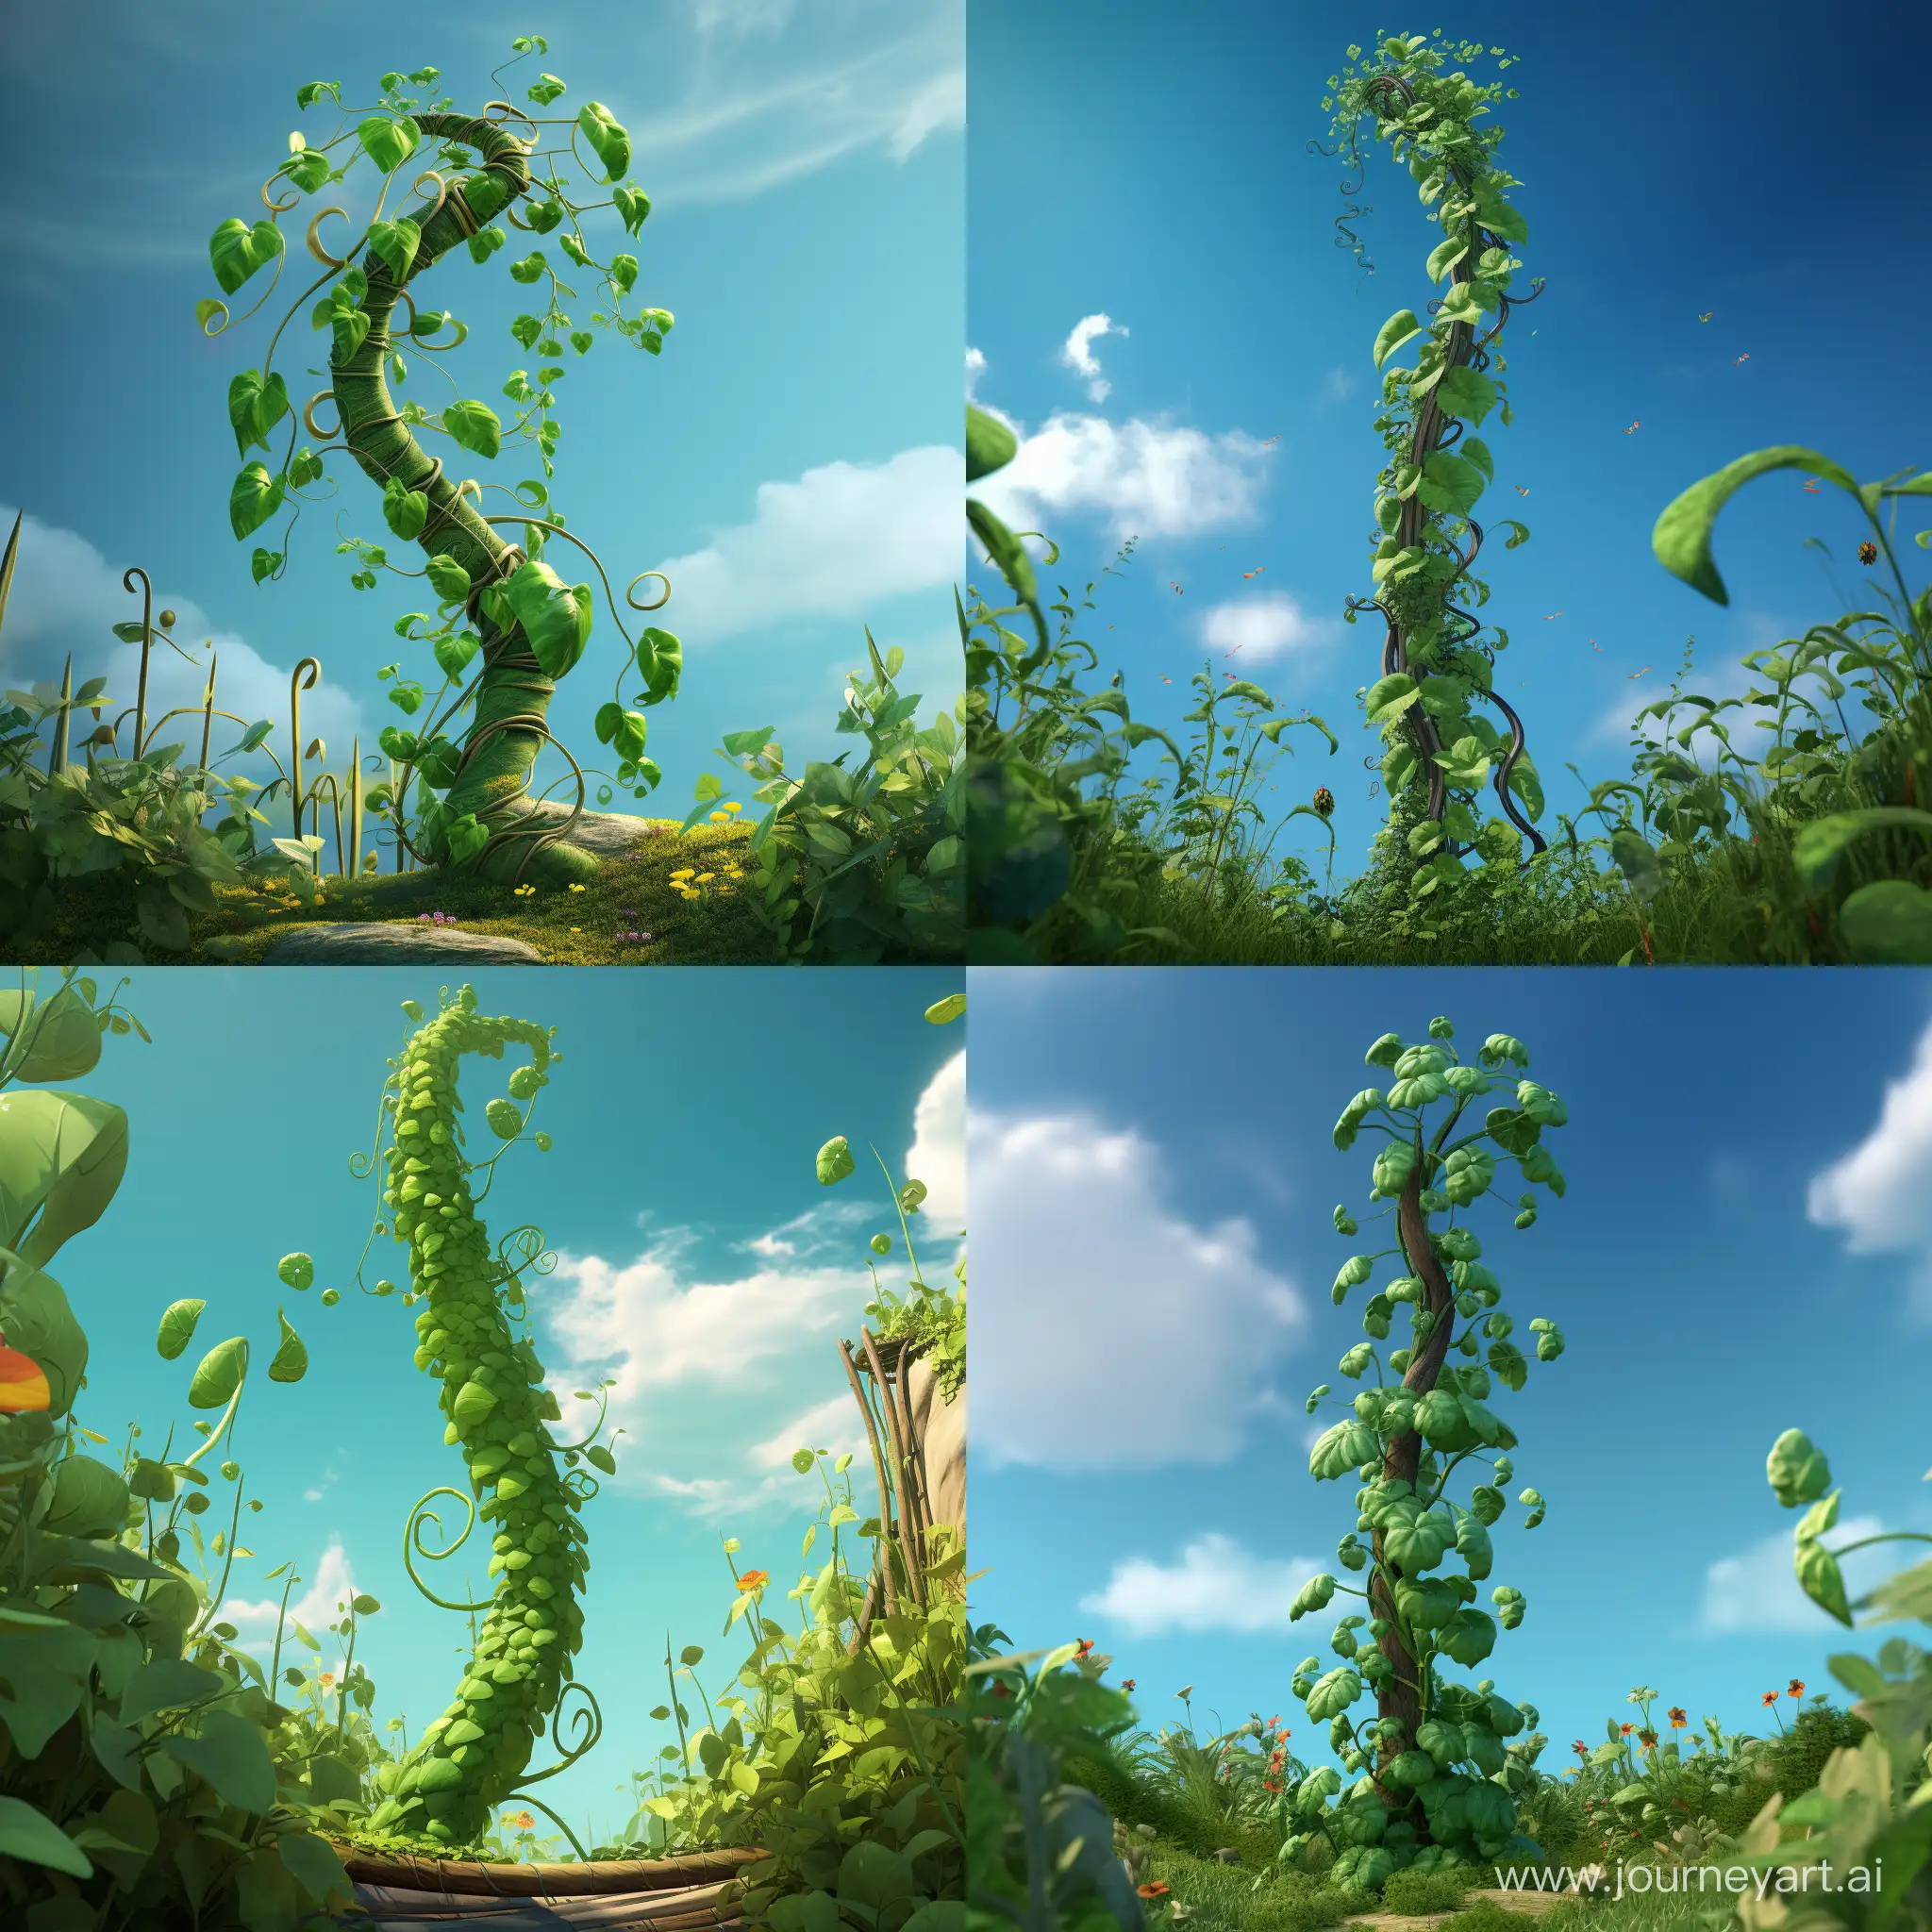 Enormous-Green-Beanstalk-Towering-in-3D-Animation